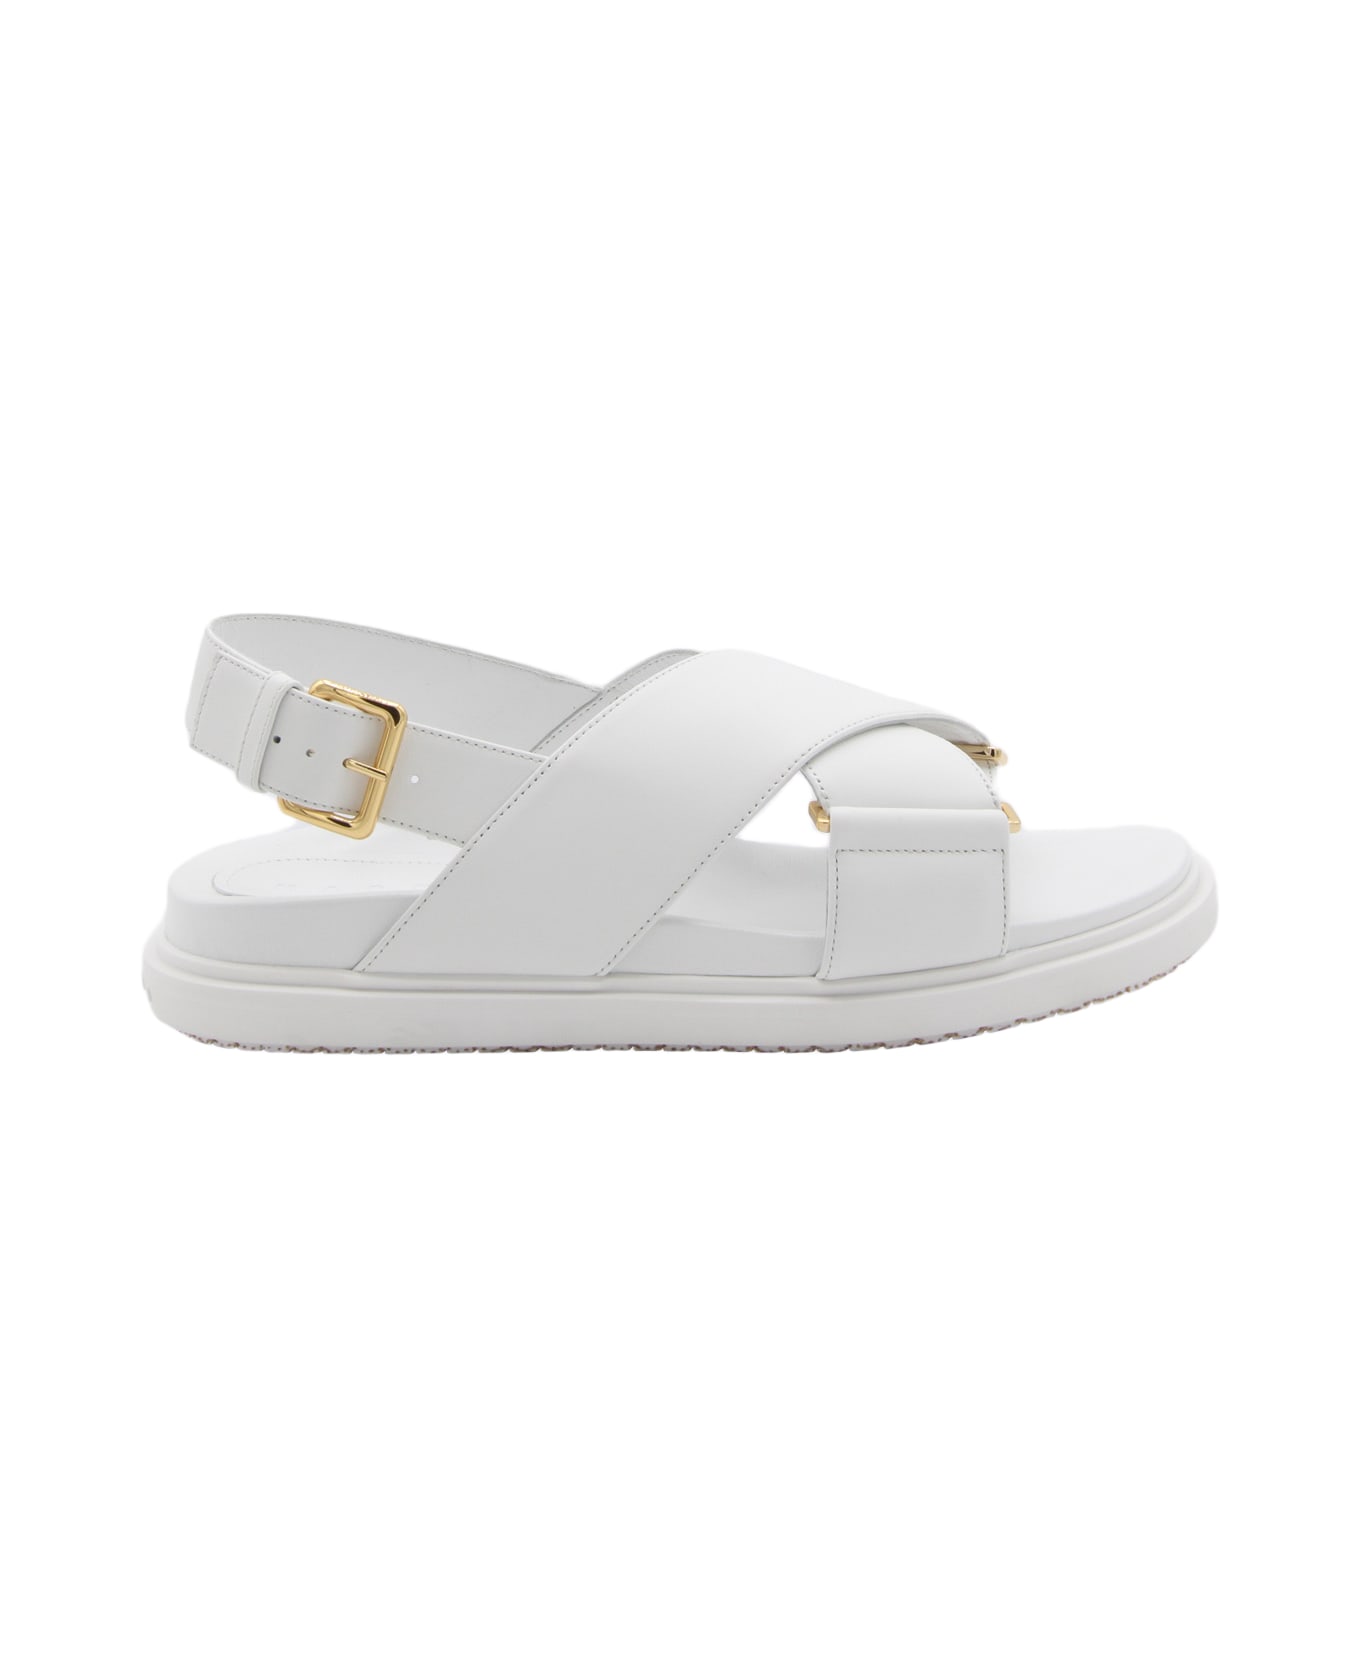 Marni White Leather Fussbet Sandals - LILY WHITE サンダル